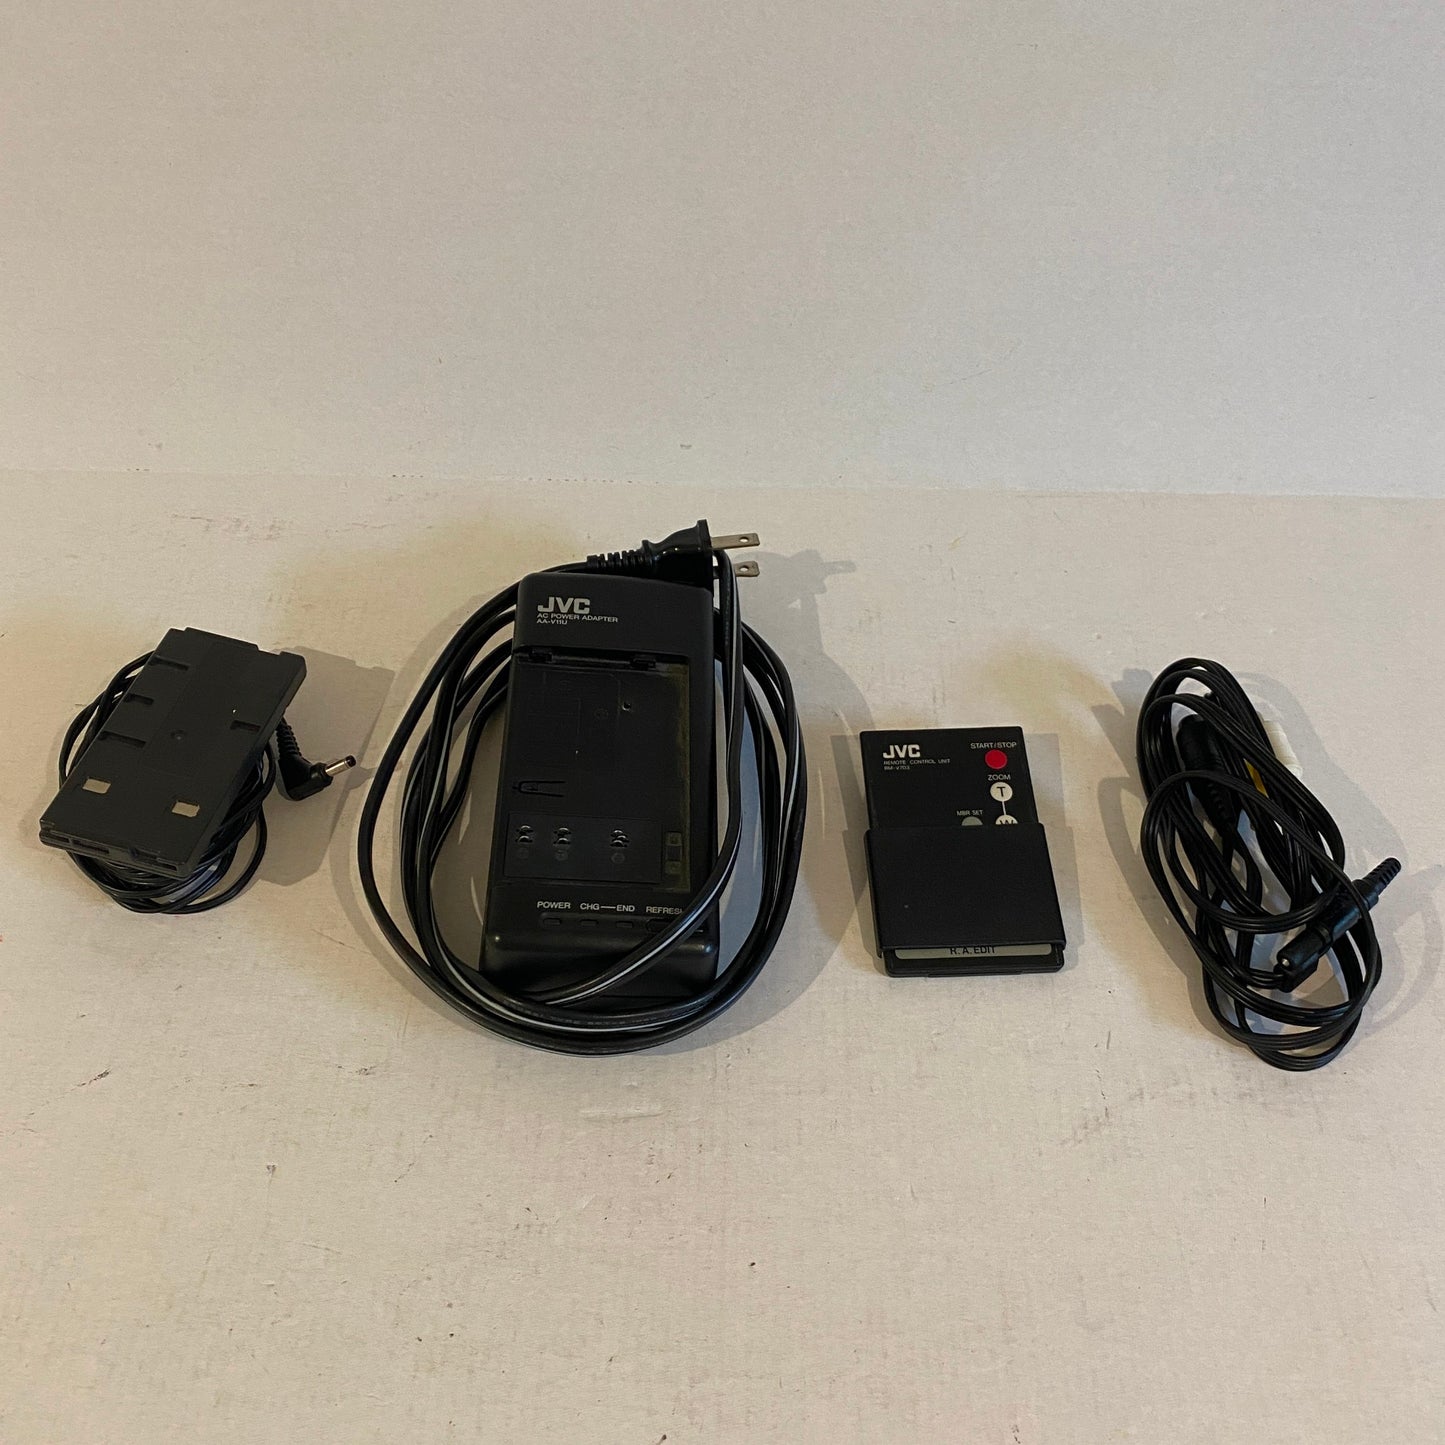 JVC AC Charger Kit with A/V Cable, Battery Adatper and Remote - AA-V11U